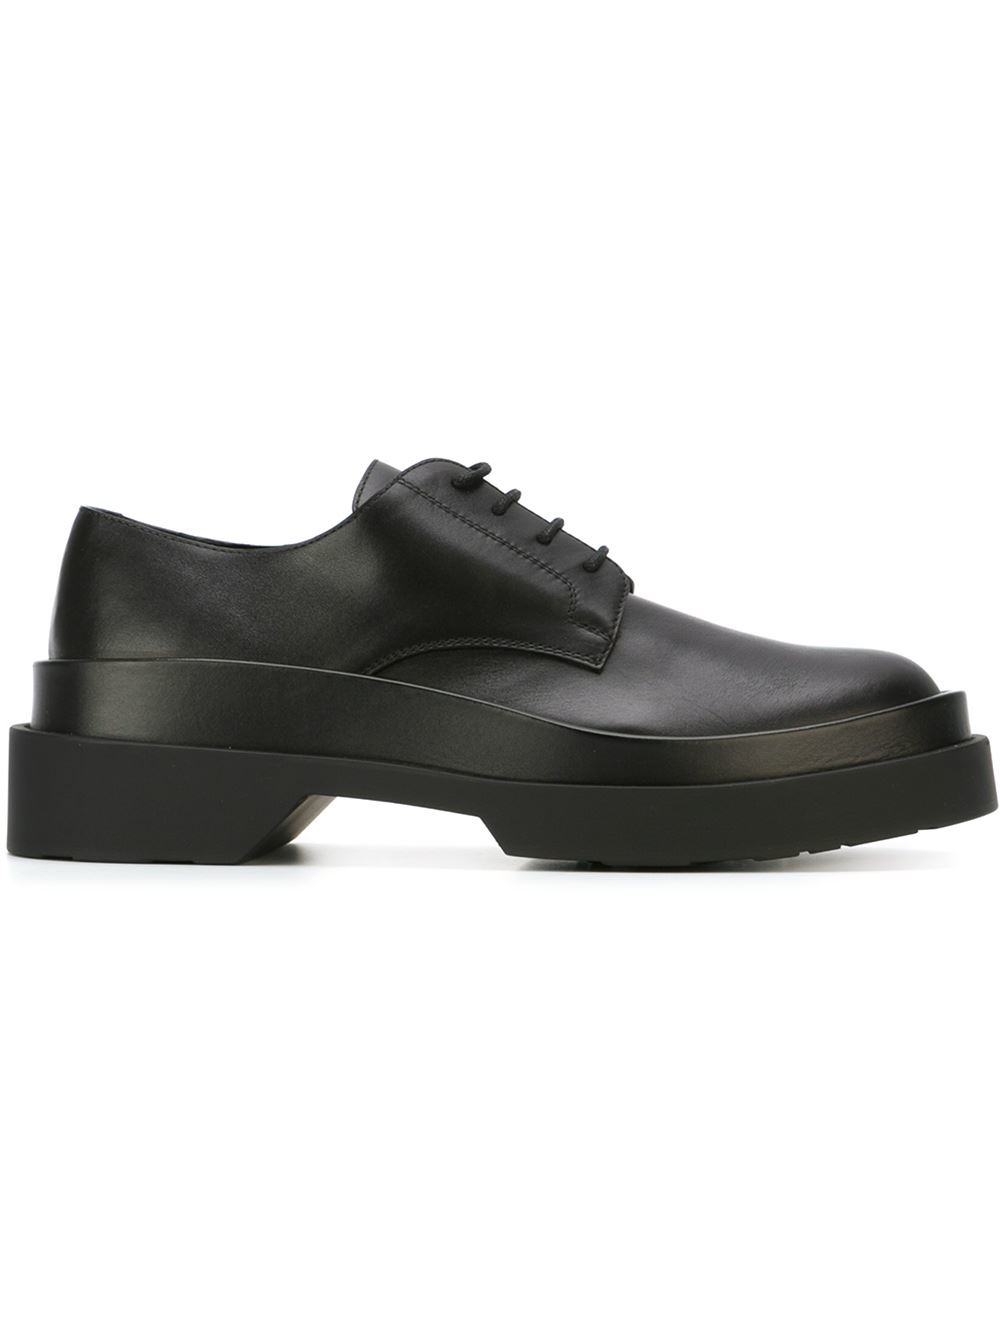 Jil Sander Double Sole Lace-up Shoes in Black for Men - Lyst